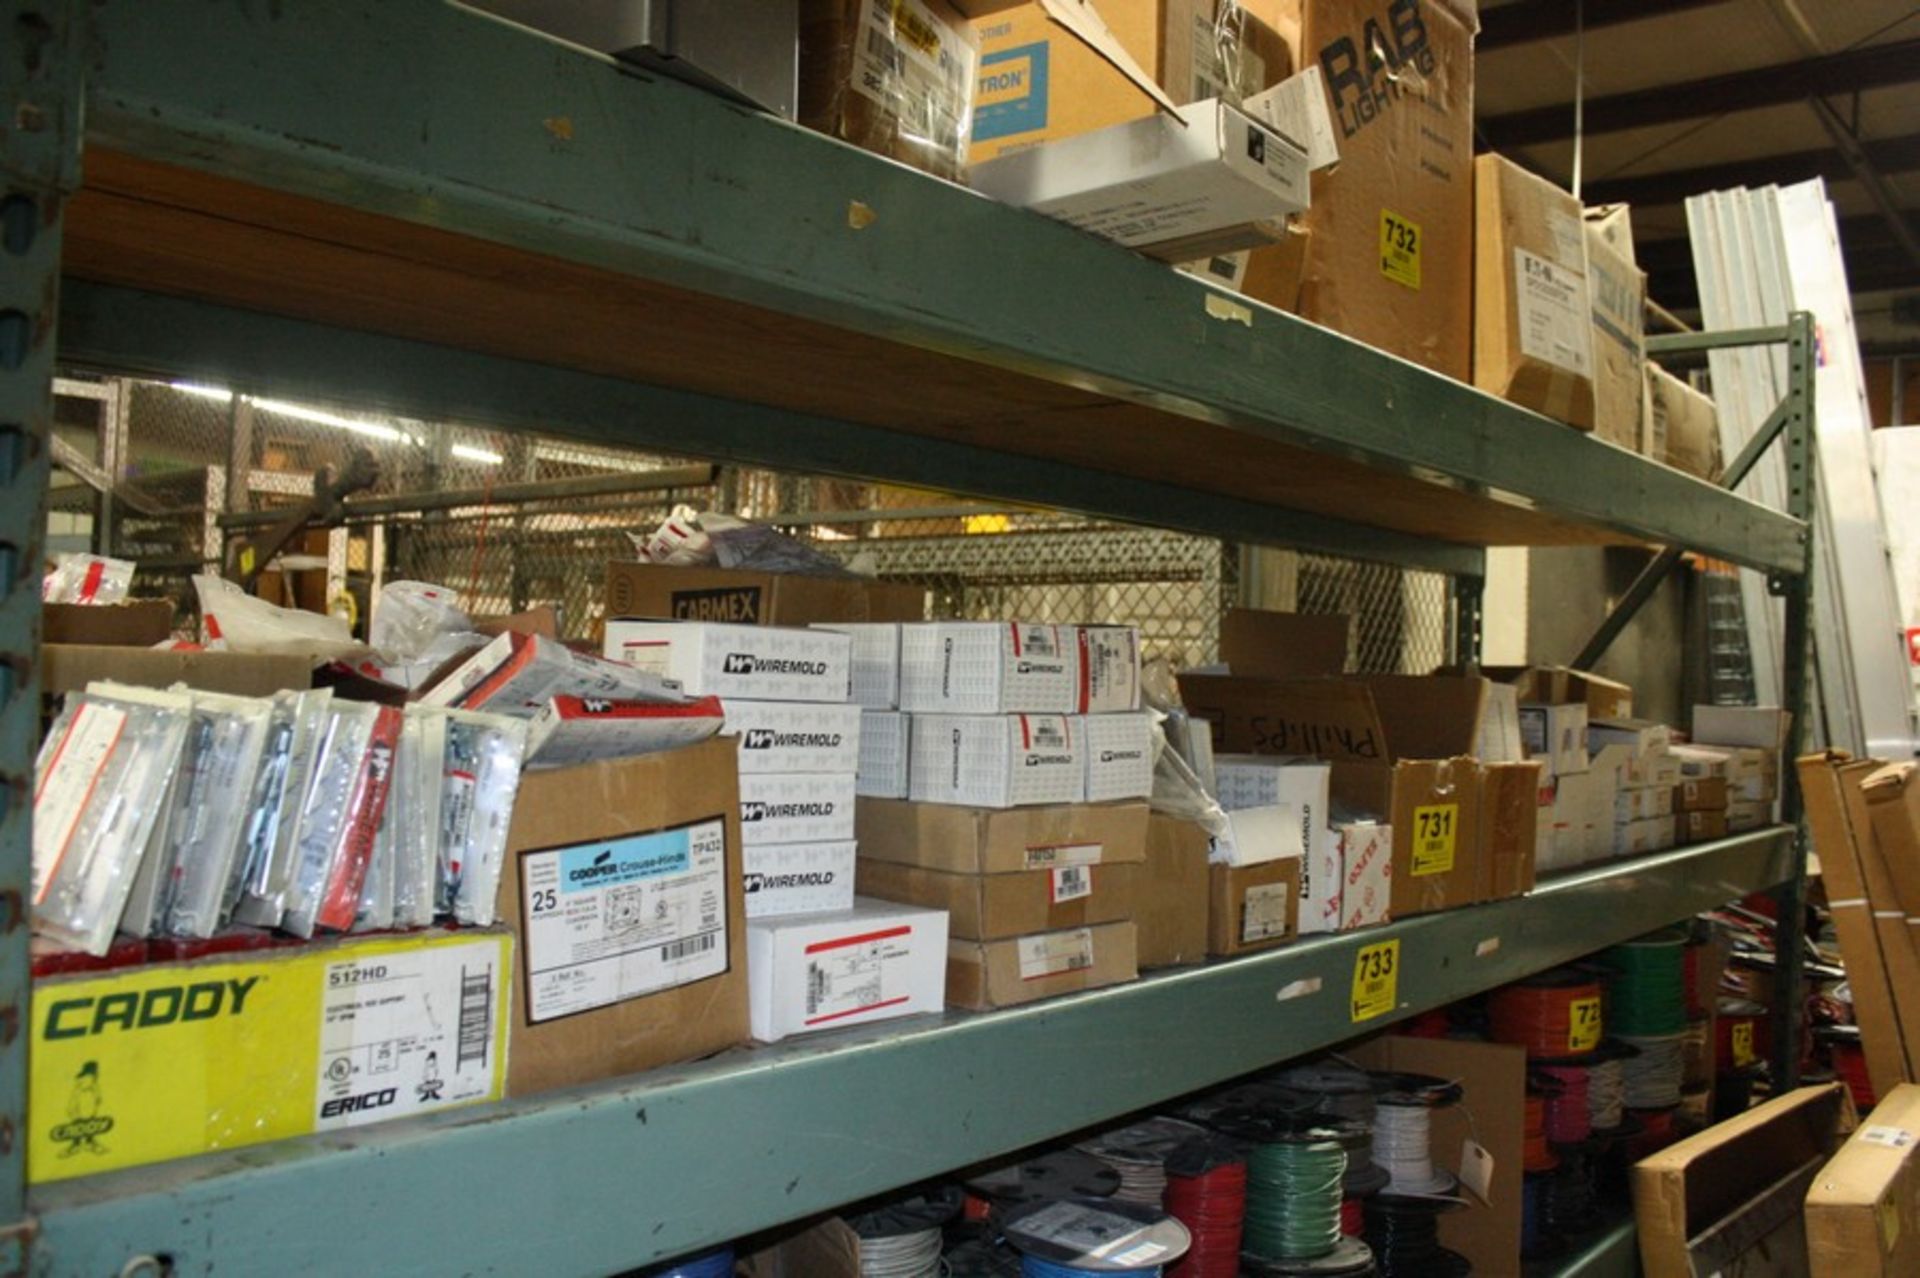 ASSORTED WIREMOLD COMPONENTS ON SHELF